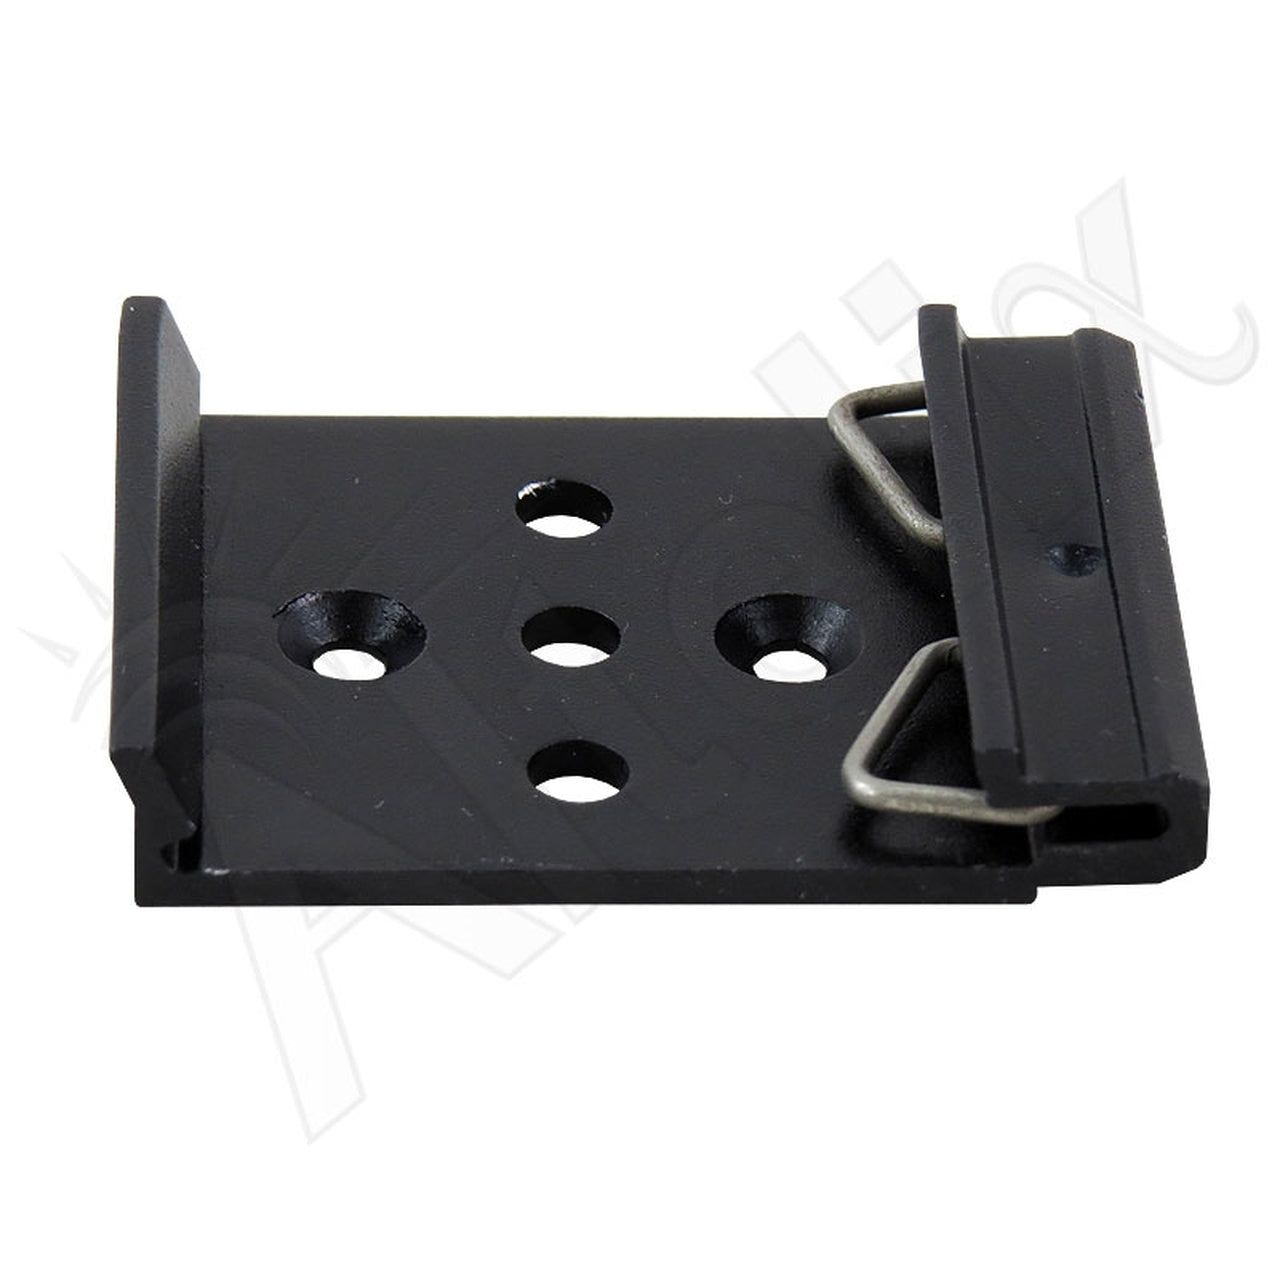 35mm Wide Aluminum DIN Rail Mounting Clip for 35mm Top Hat Rail - 0